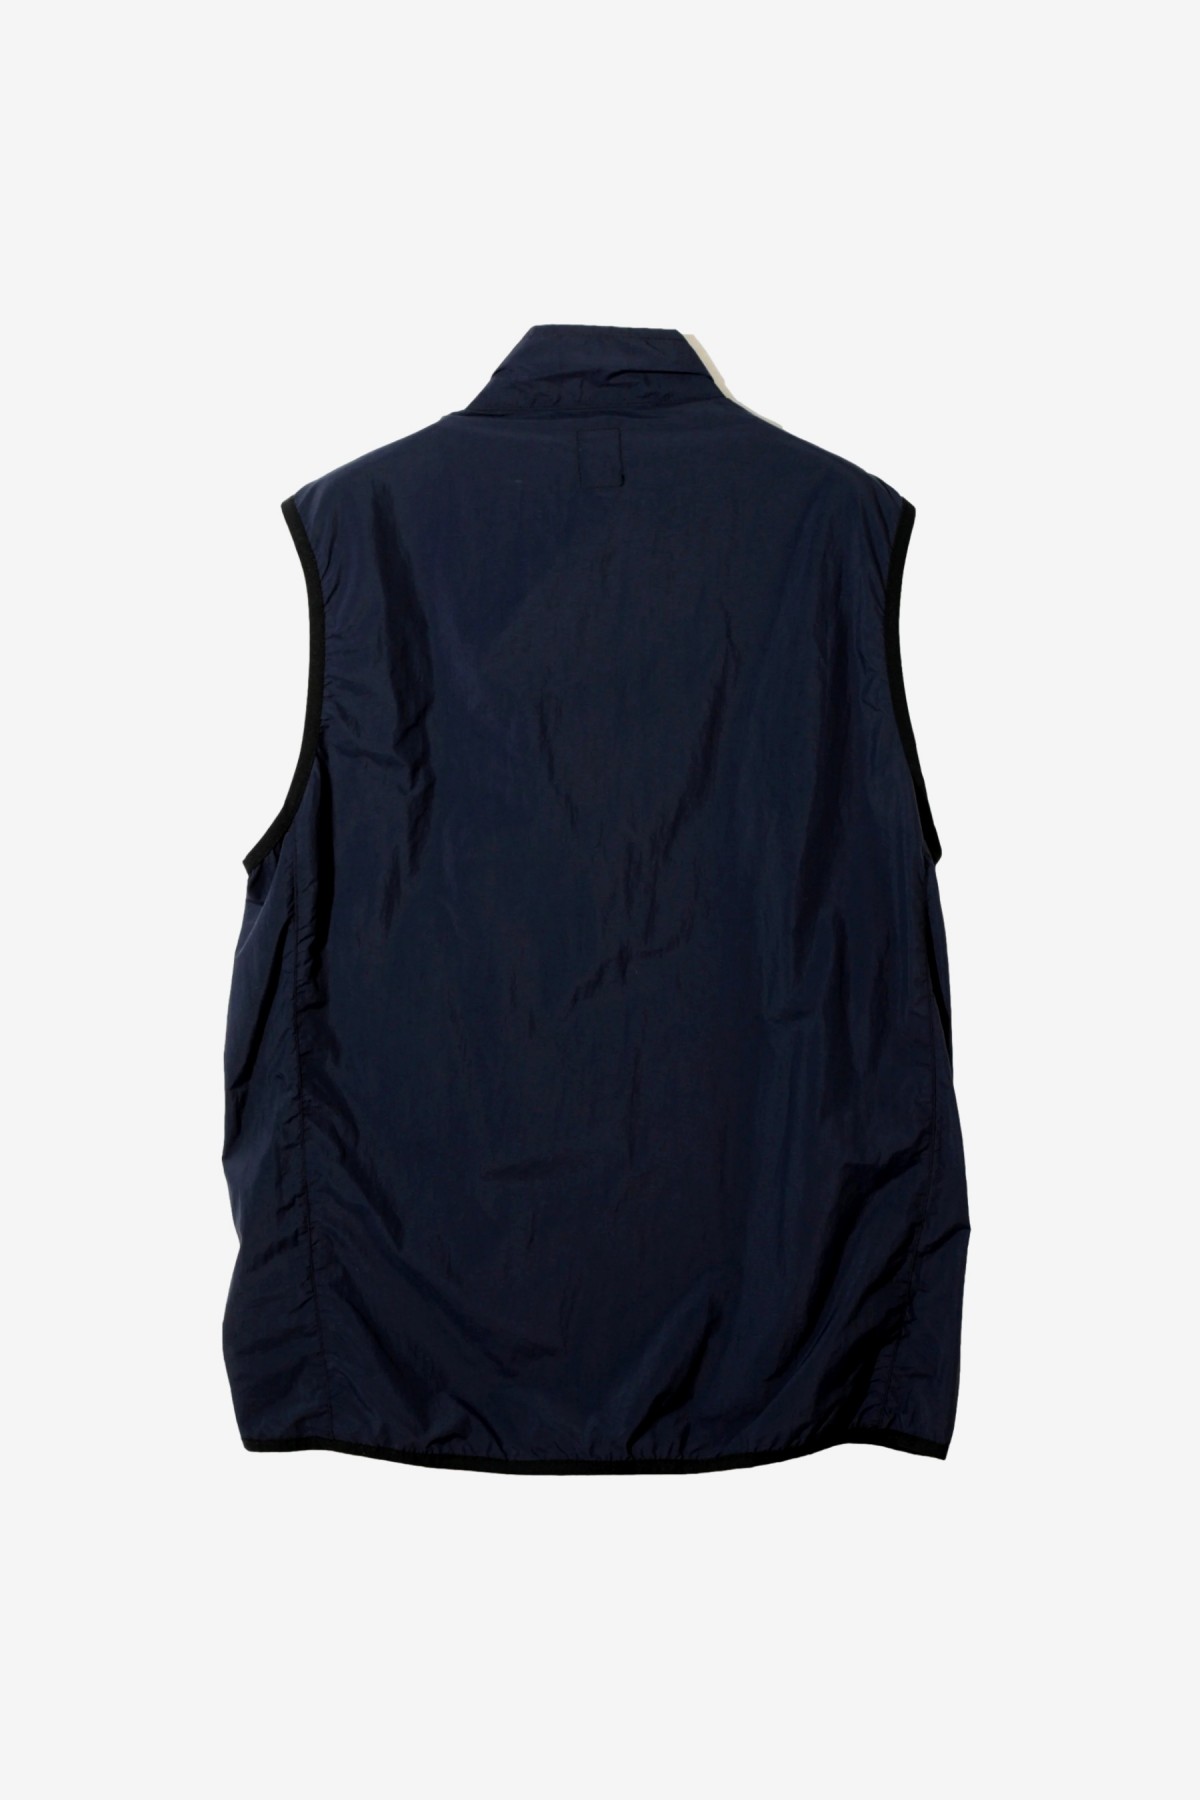 Packable Vest in Navy - South2 West8 | Afura Store